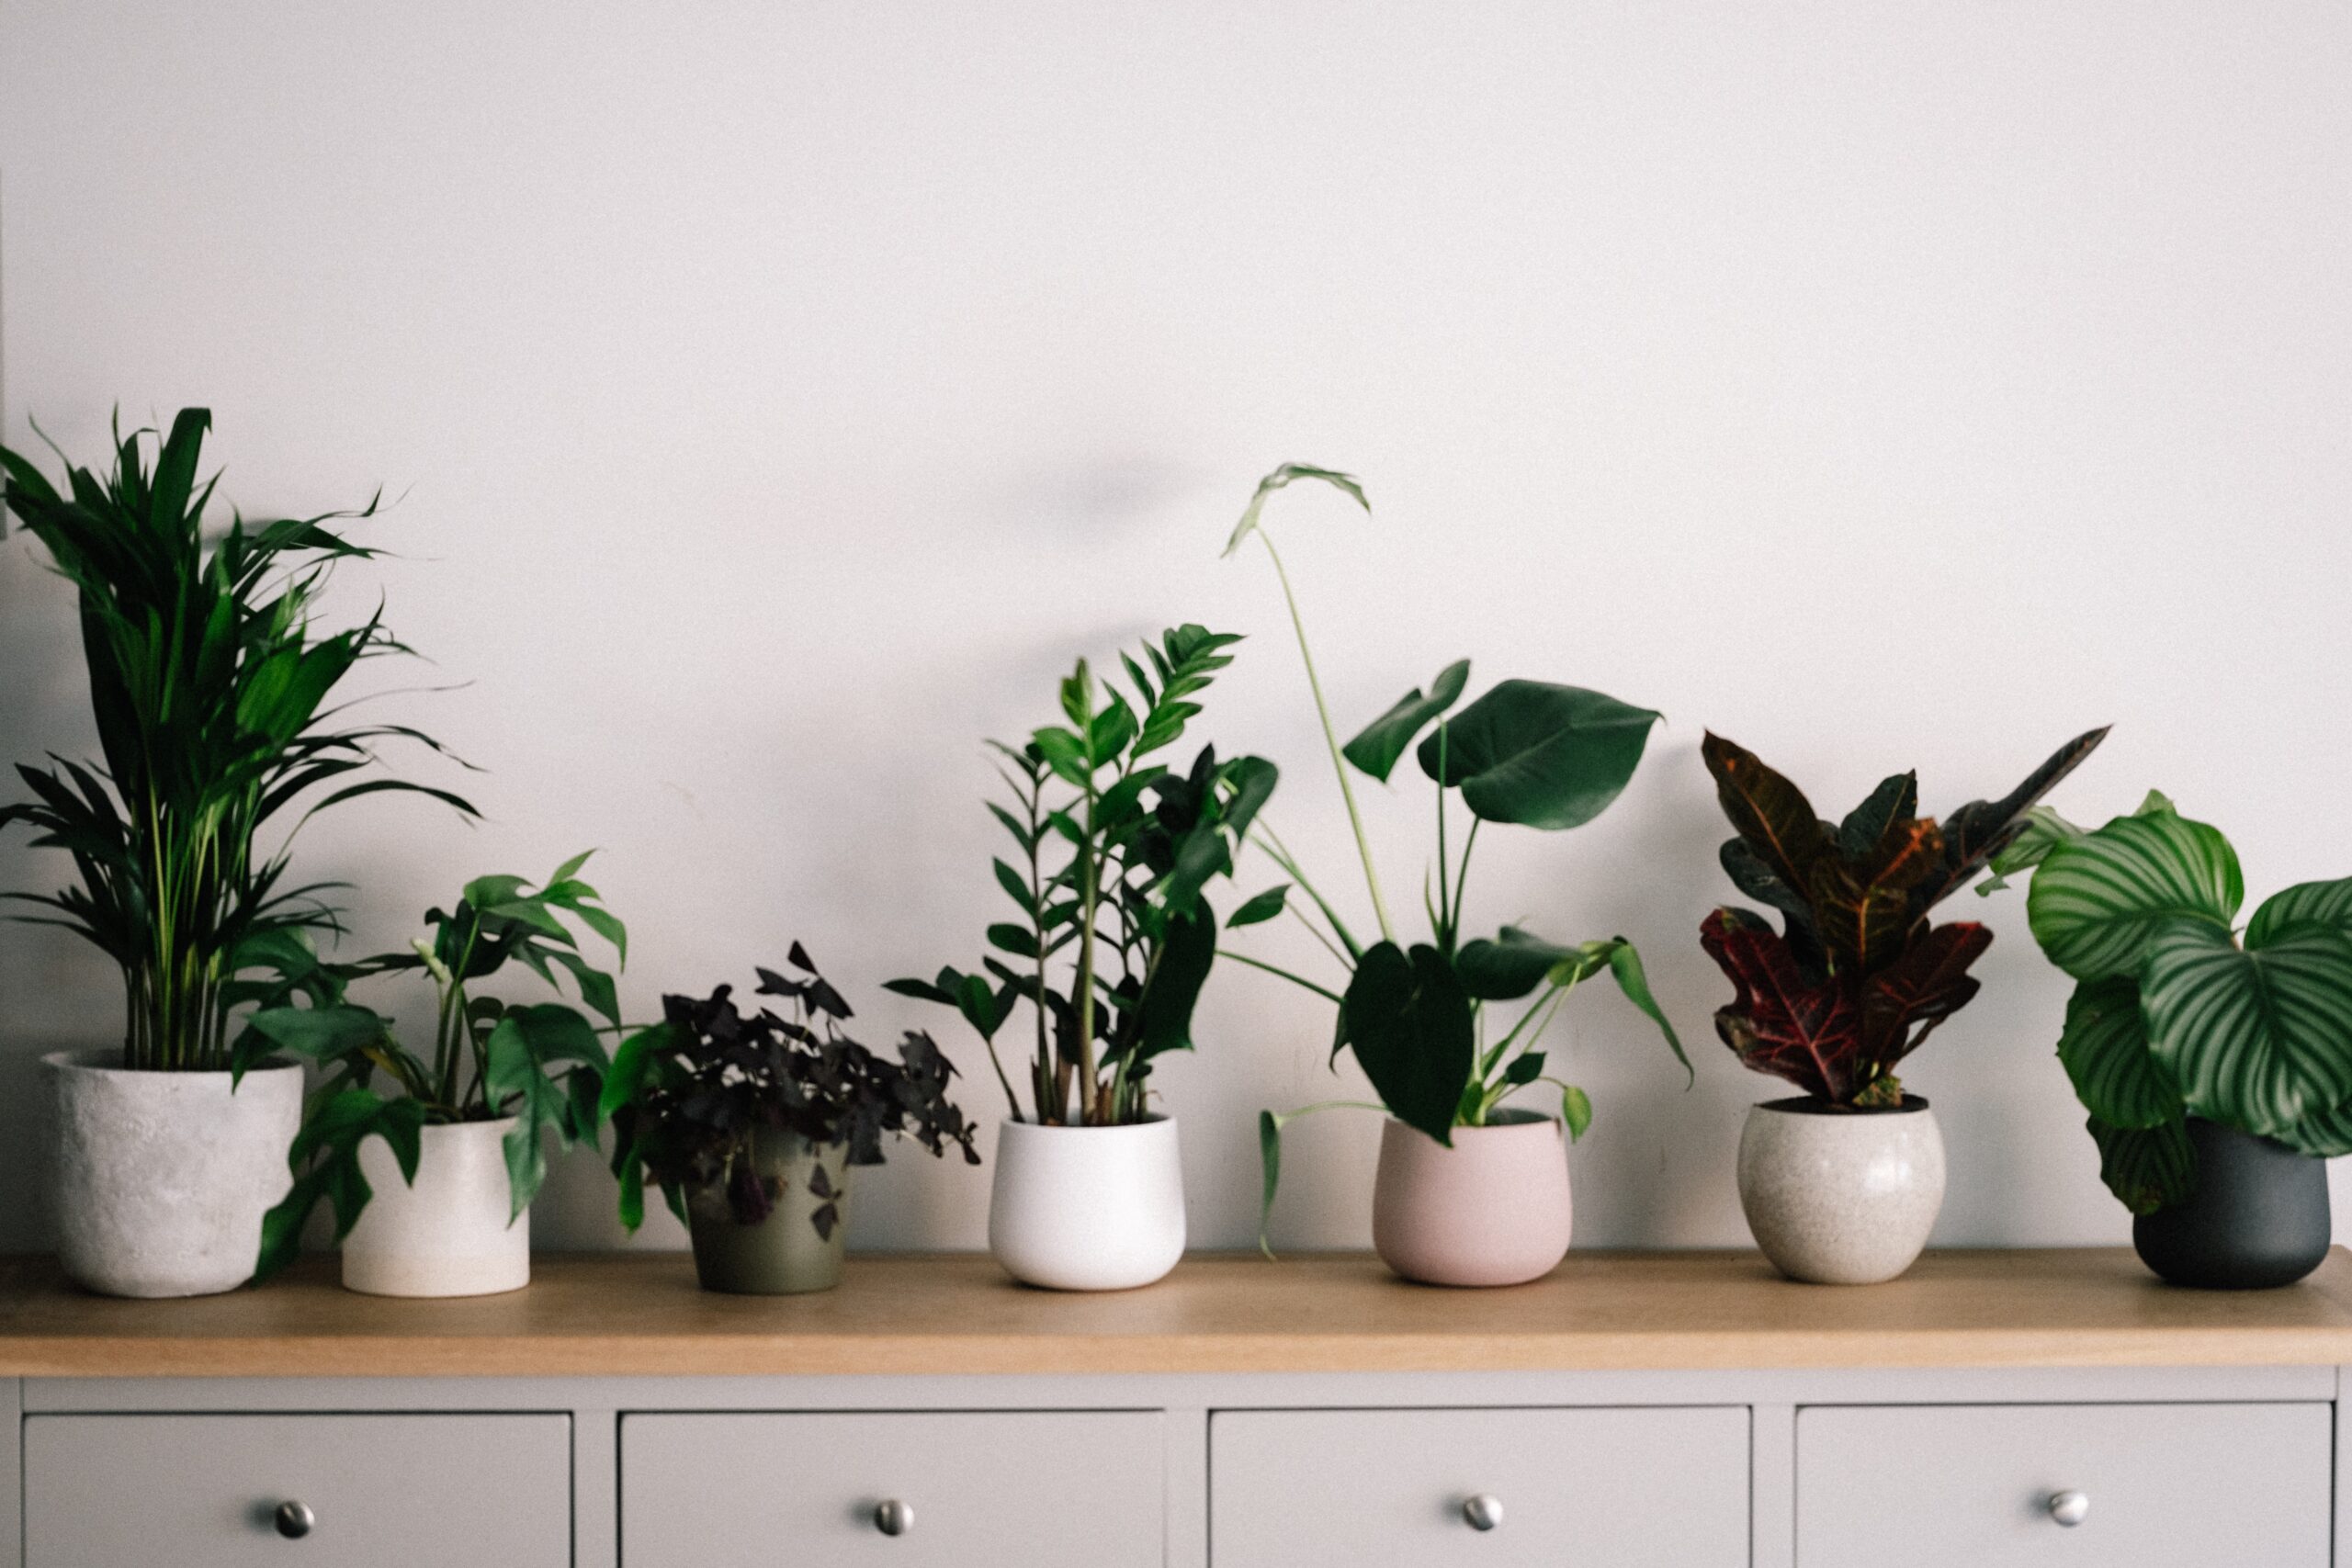 Houseplant hydroponics are great for limited space